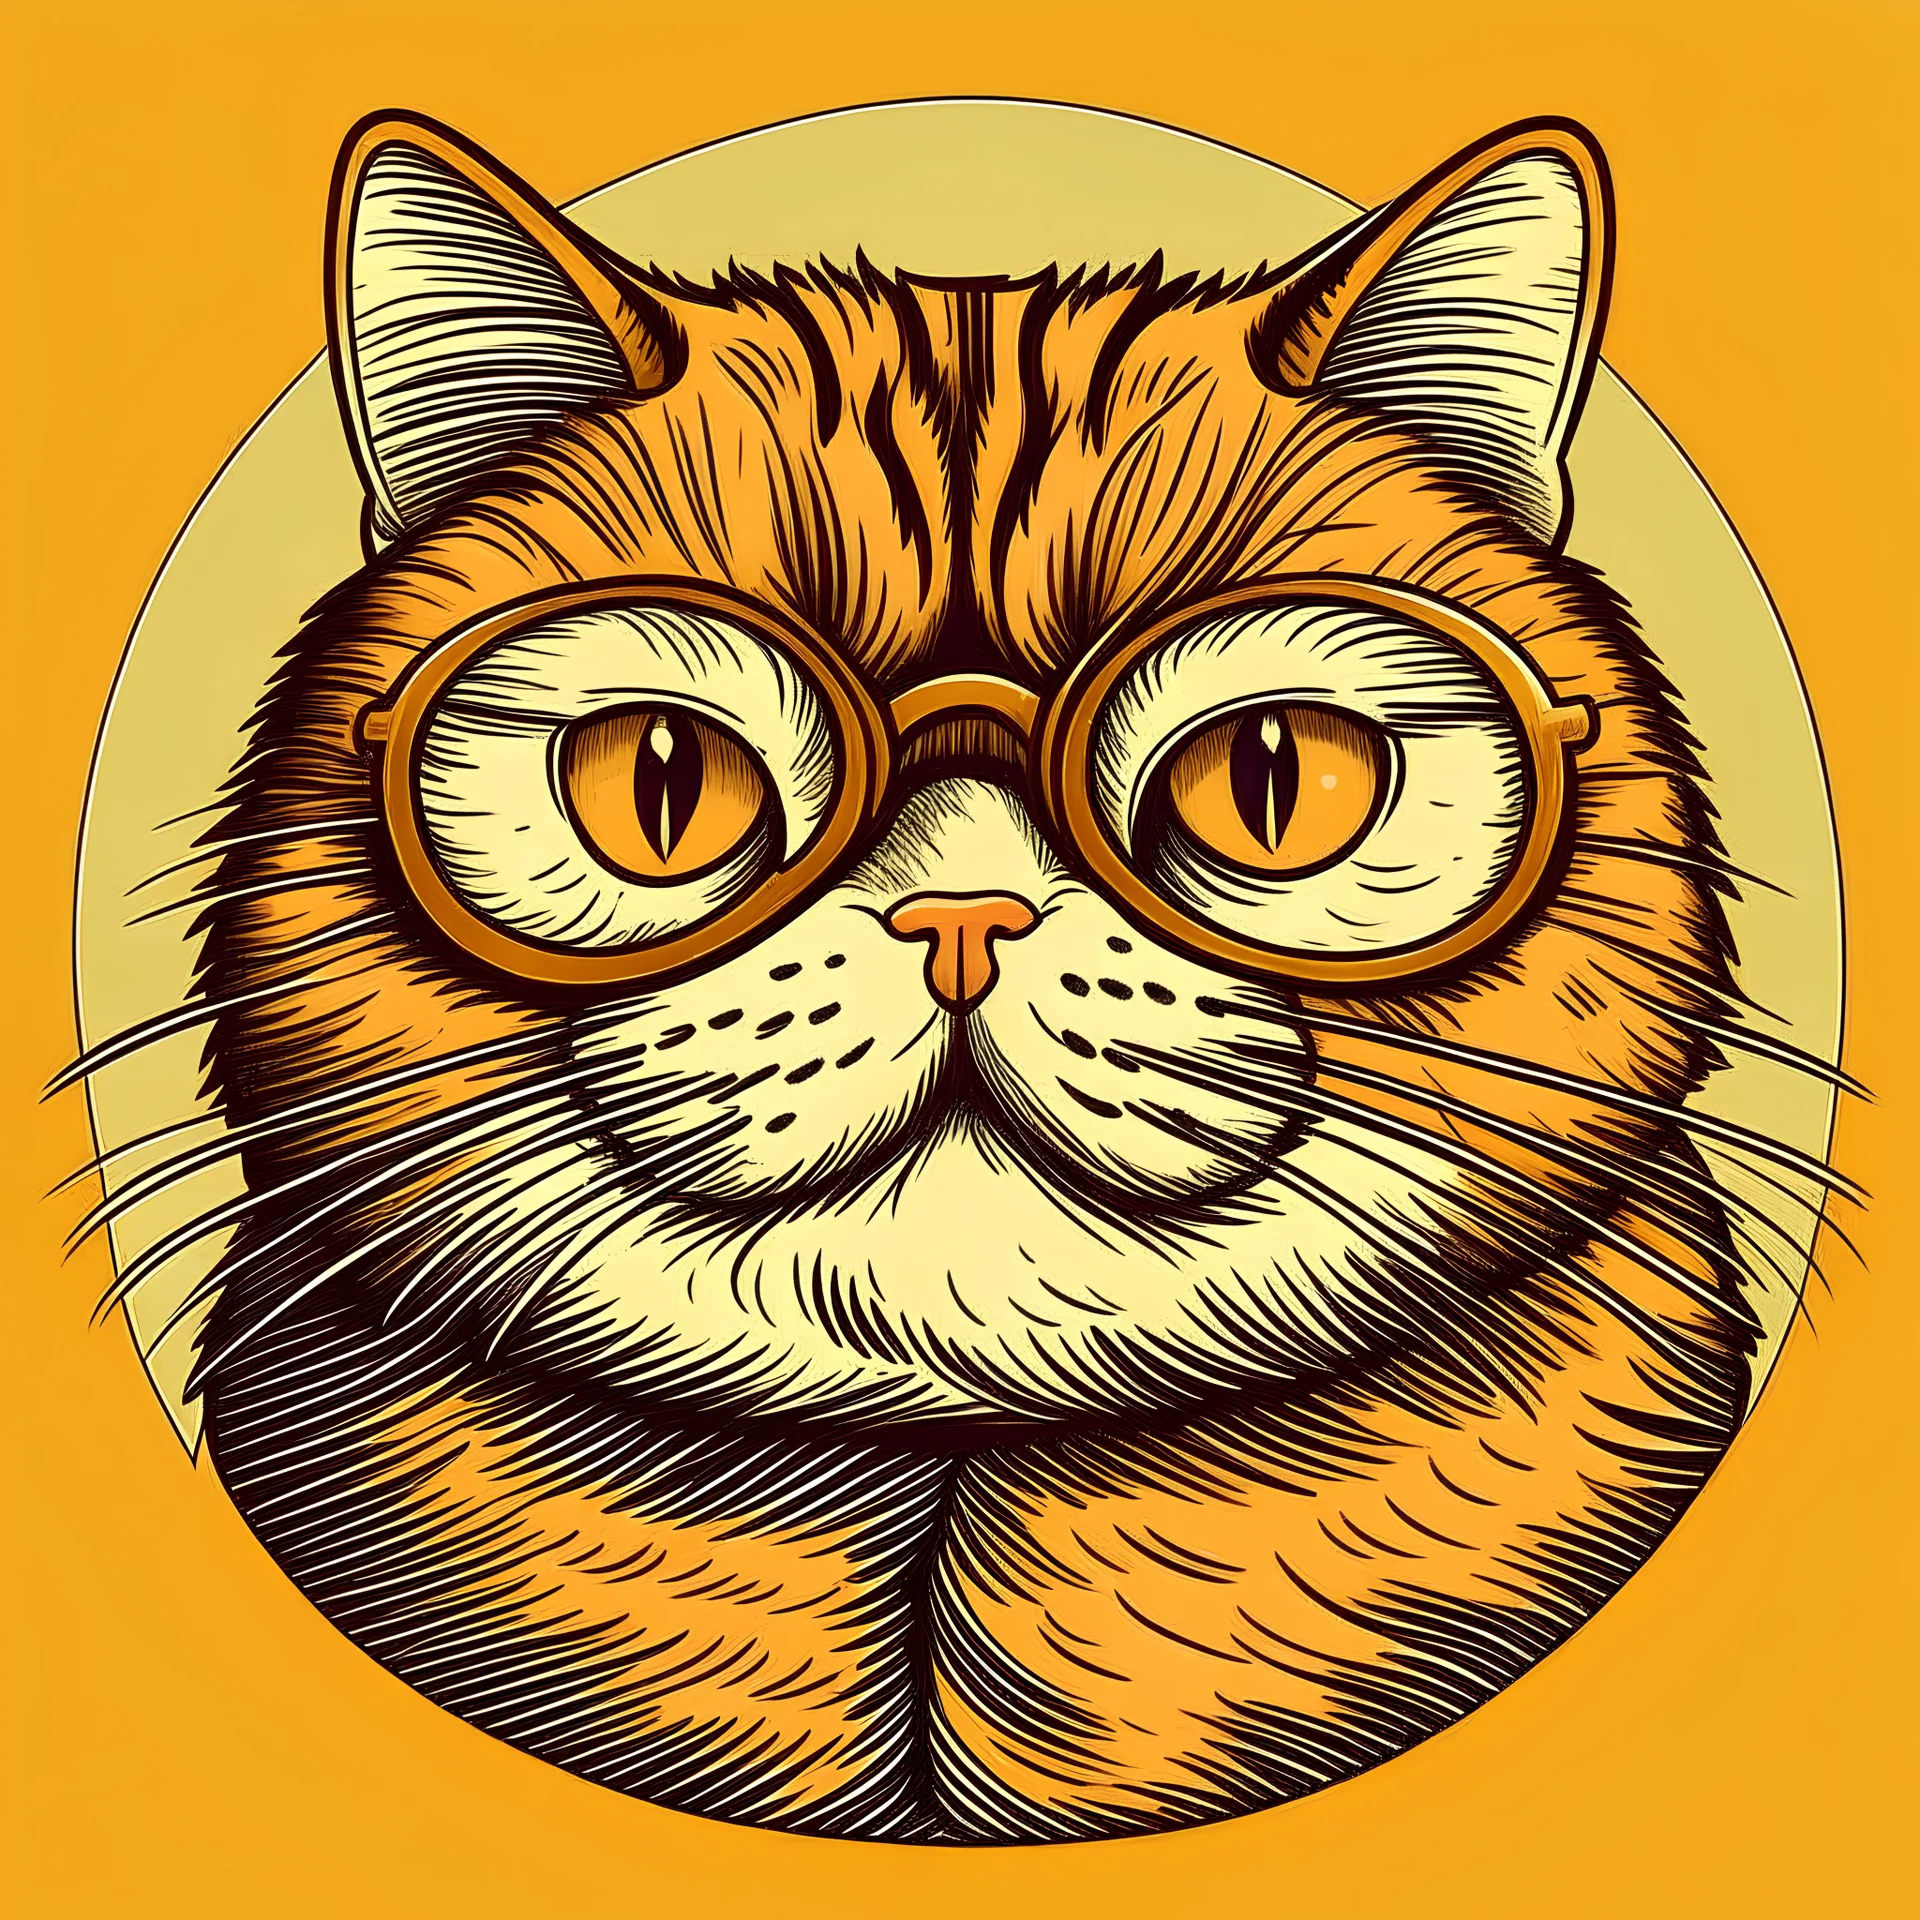 Illustration of fat cat wearing round glasses.